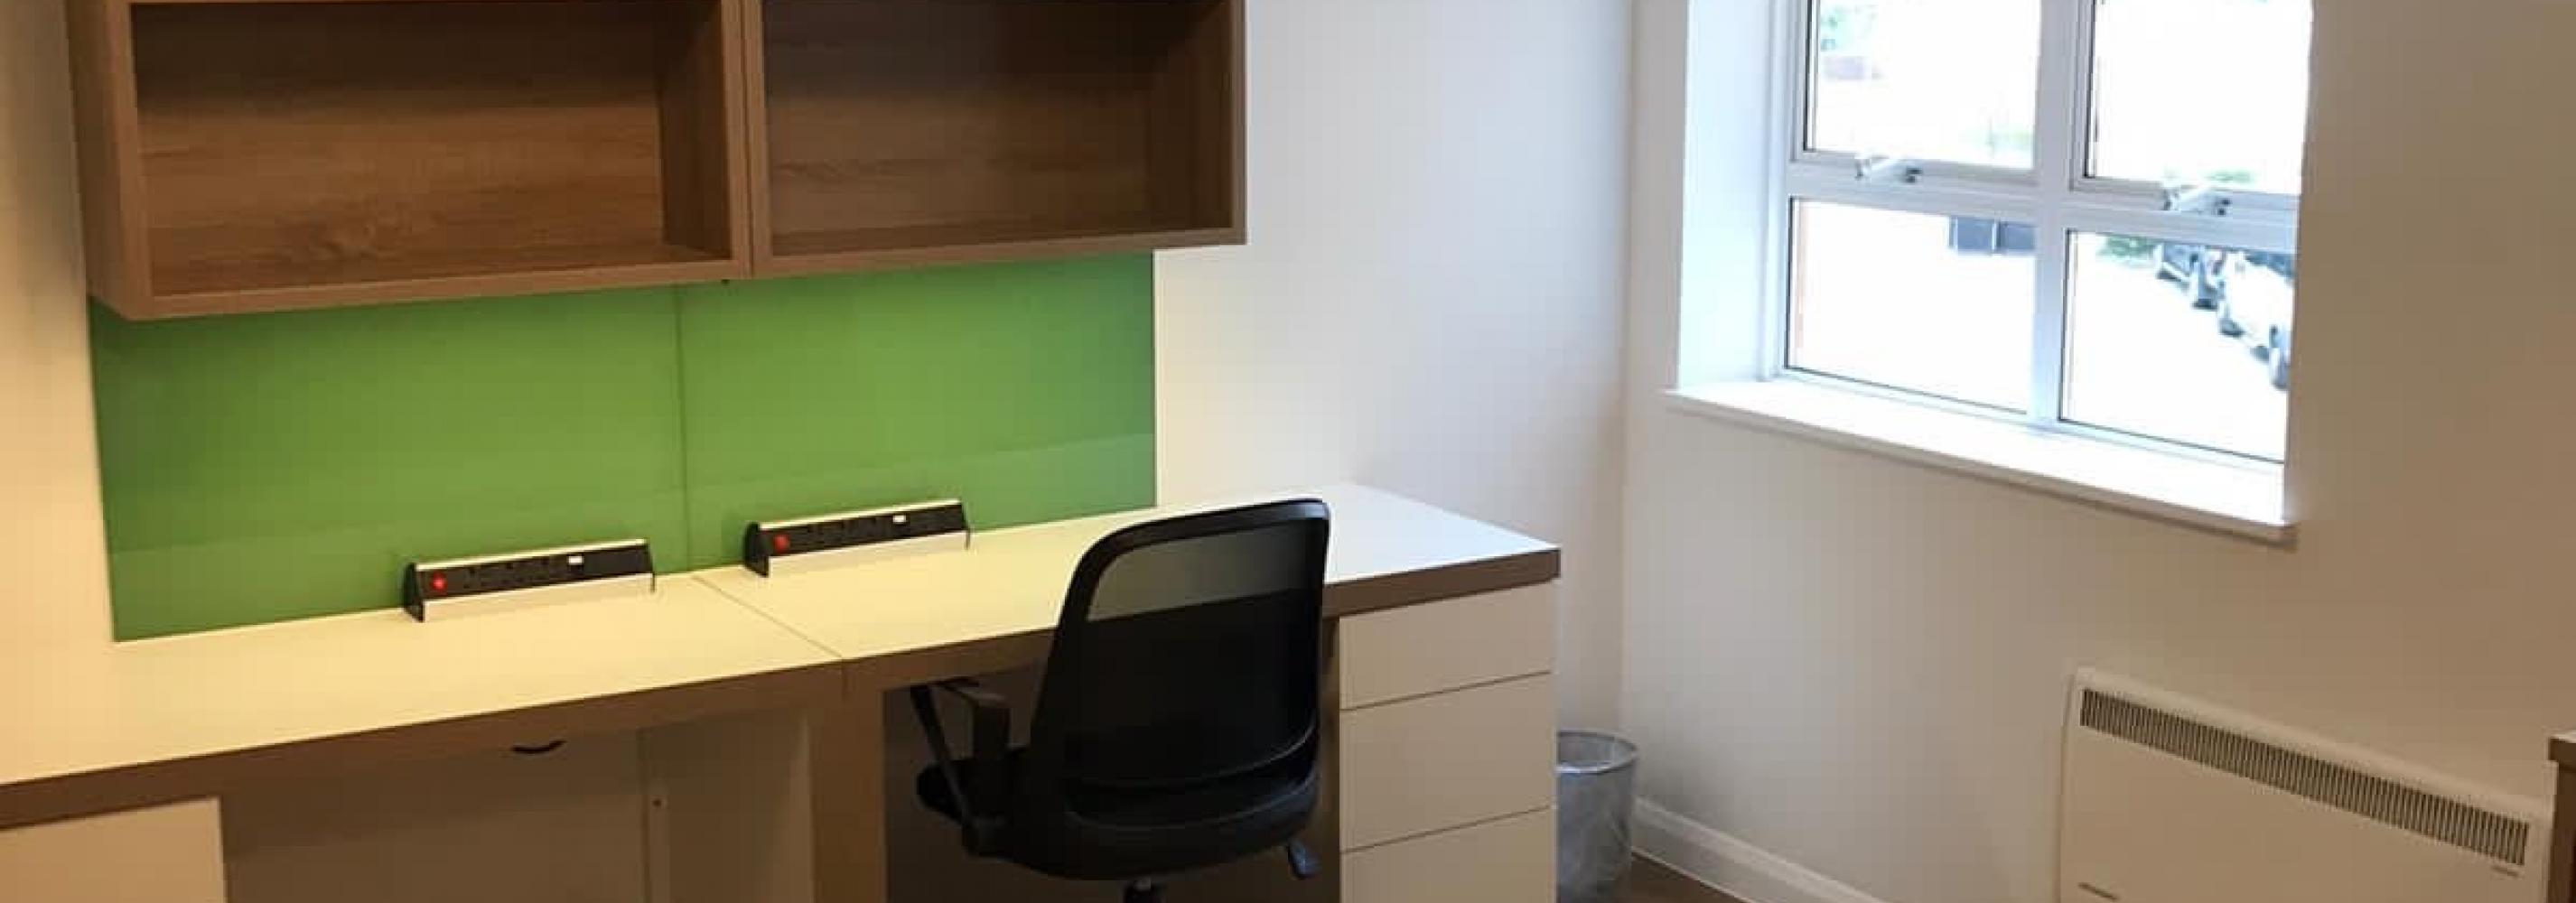 Double desk with shelving above. Window to the right. One desk chair tucked in.